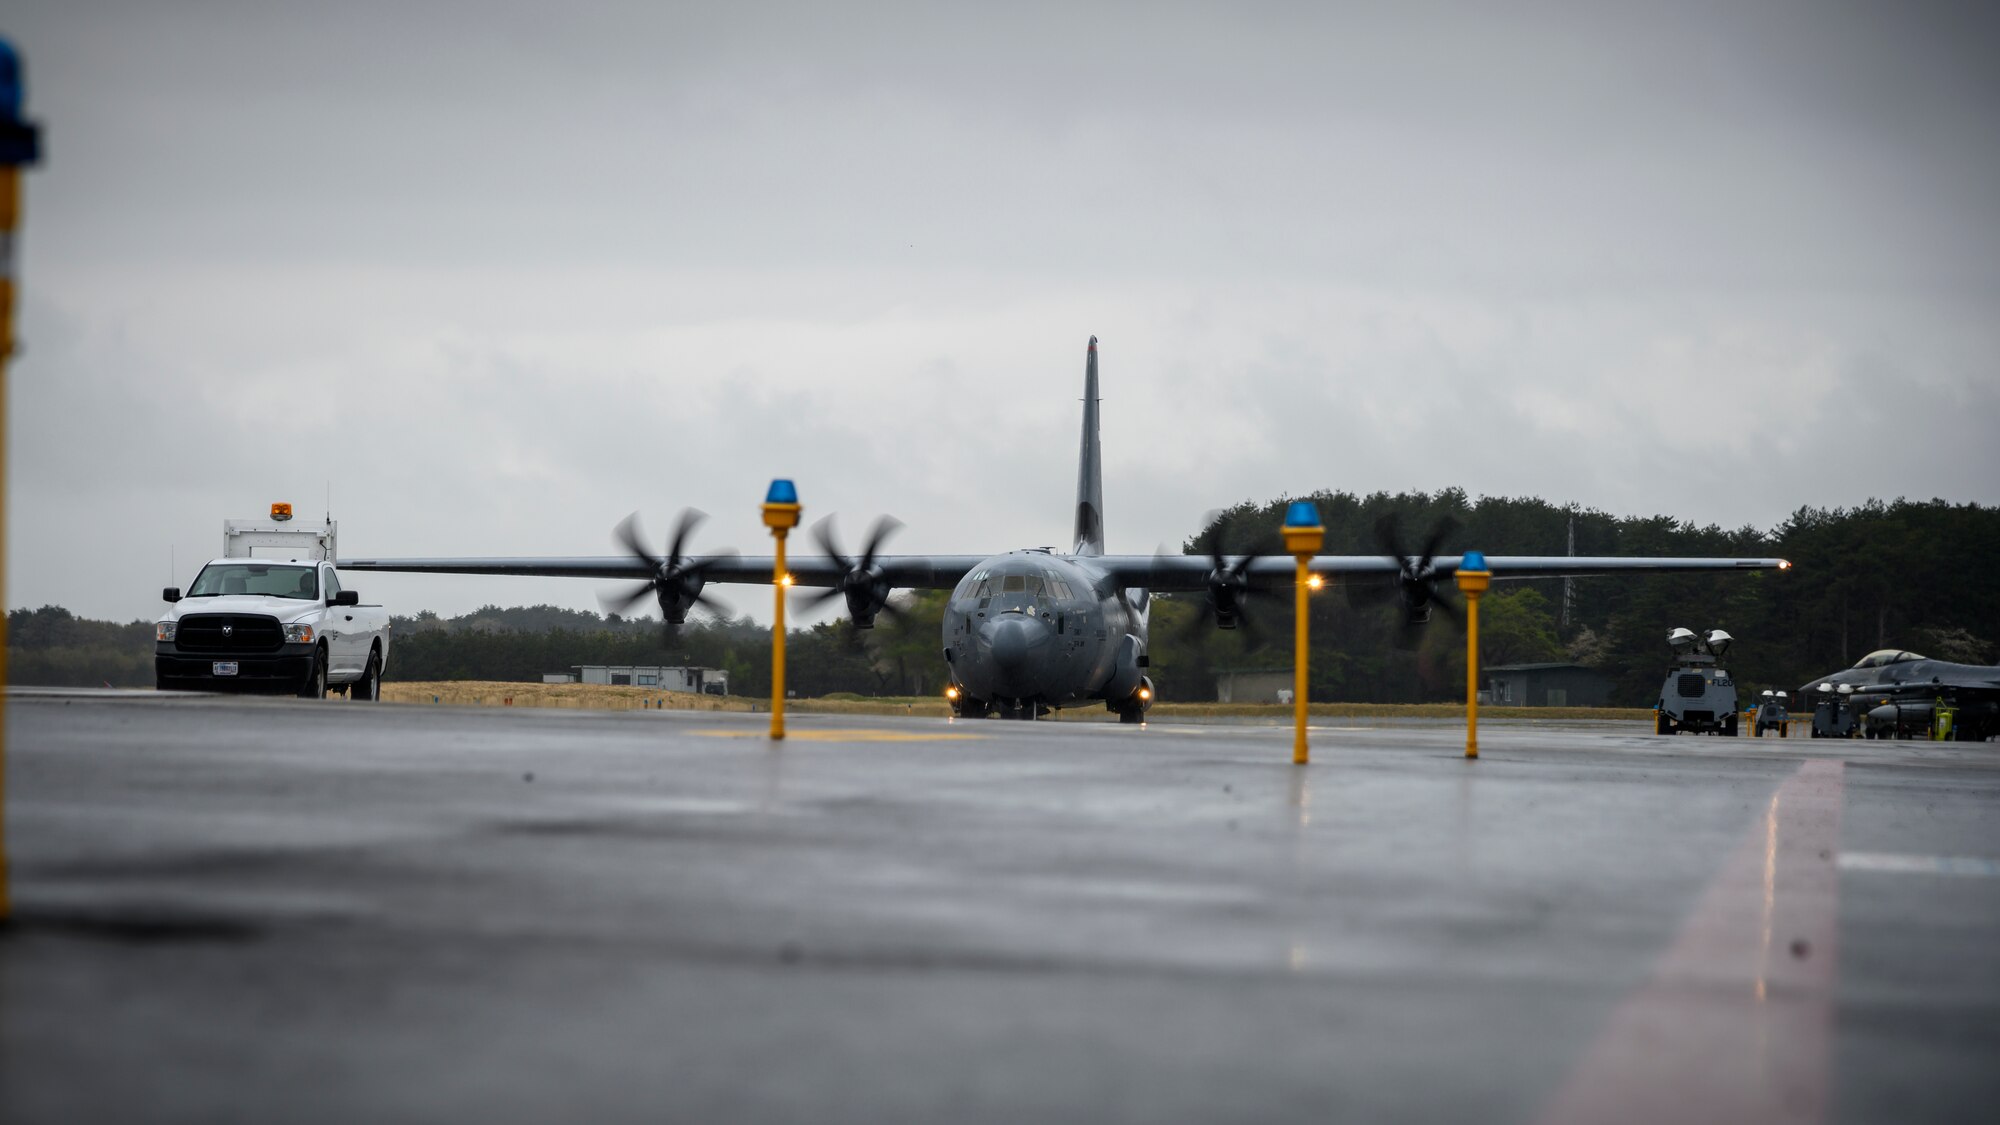 A C-130J Super Hercules from the 374th Airlift Wing taxis down the flightline during the Beverly Sunrise 21-05 Readiness Exercise at Misawa Air Base, Japan, May 2, 2021. The C-130s are transporting cargo and personnel to support the 35th Fighter Wing’s Agile Combat Employment capabilities. (U.S. Air Force photo by Airman 1st Class China M. Shock)